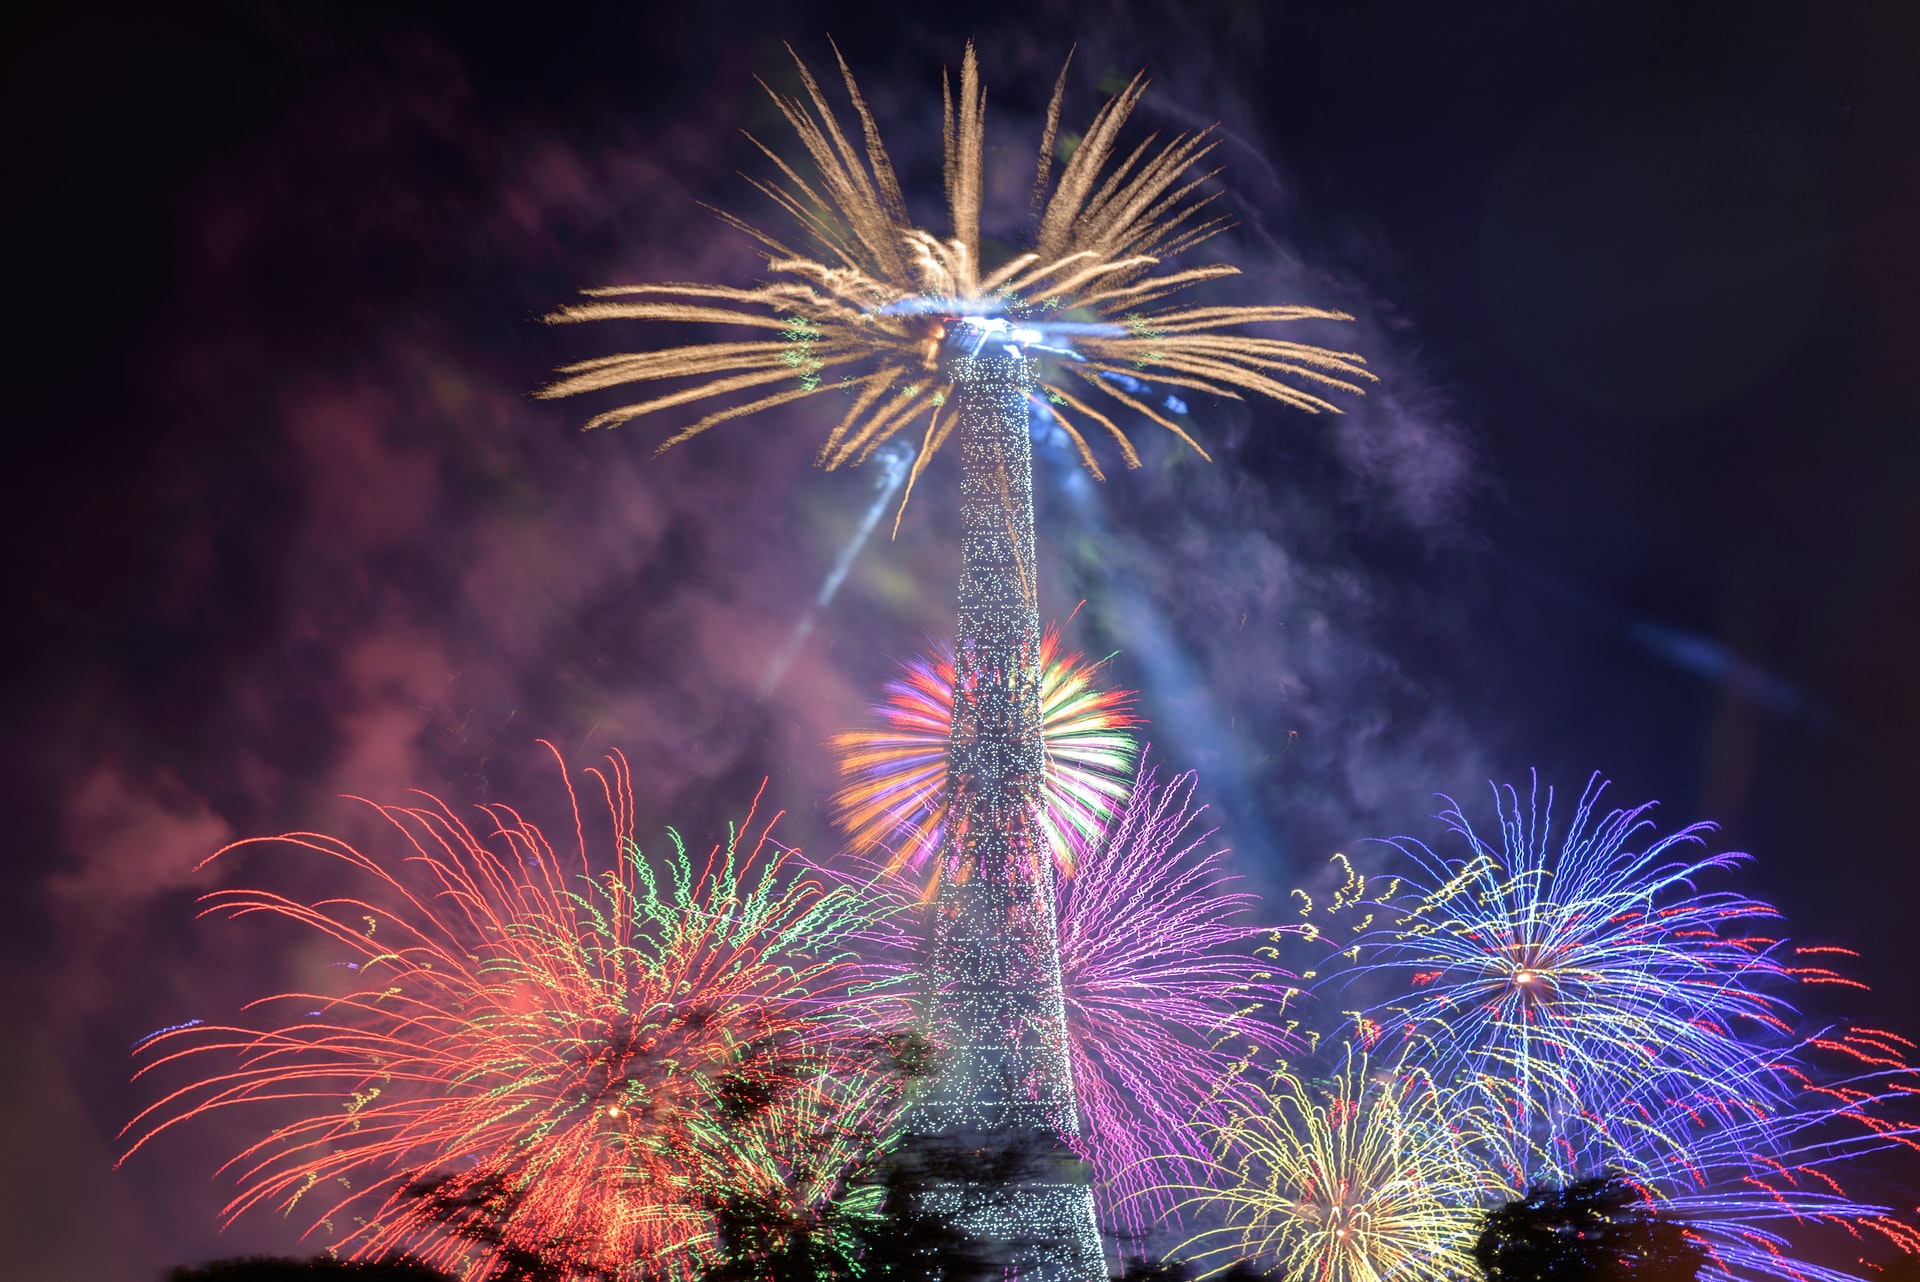 Eiffel Tower lit with colorful fireworks for Bastille Day